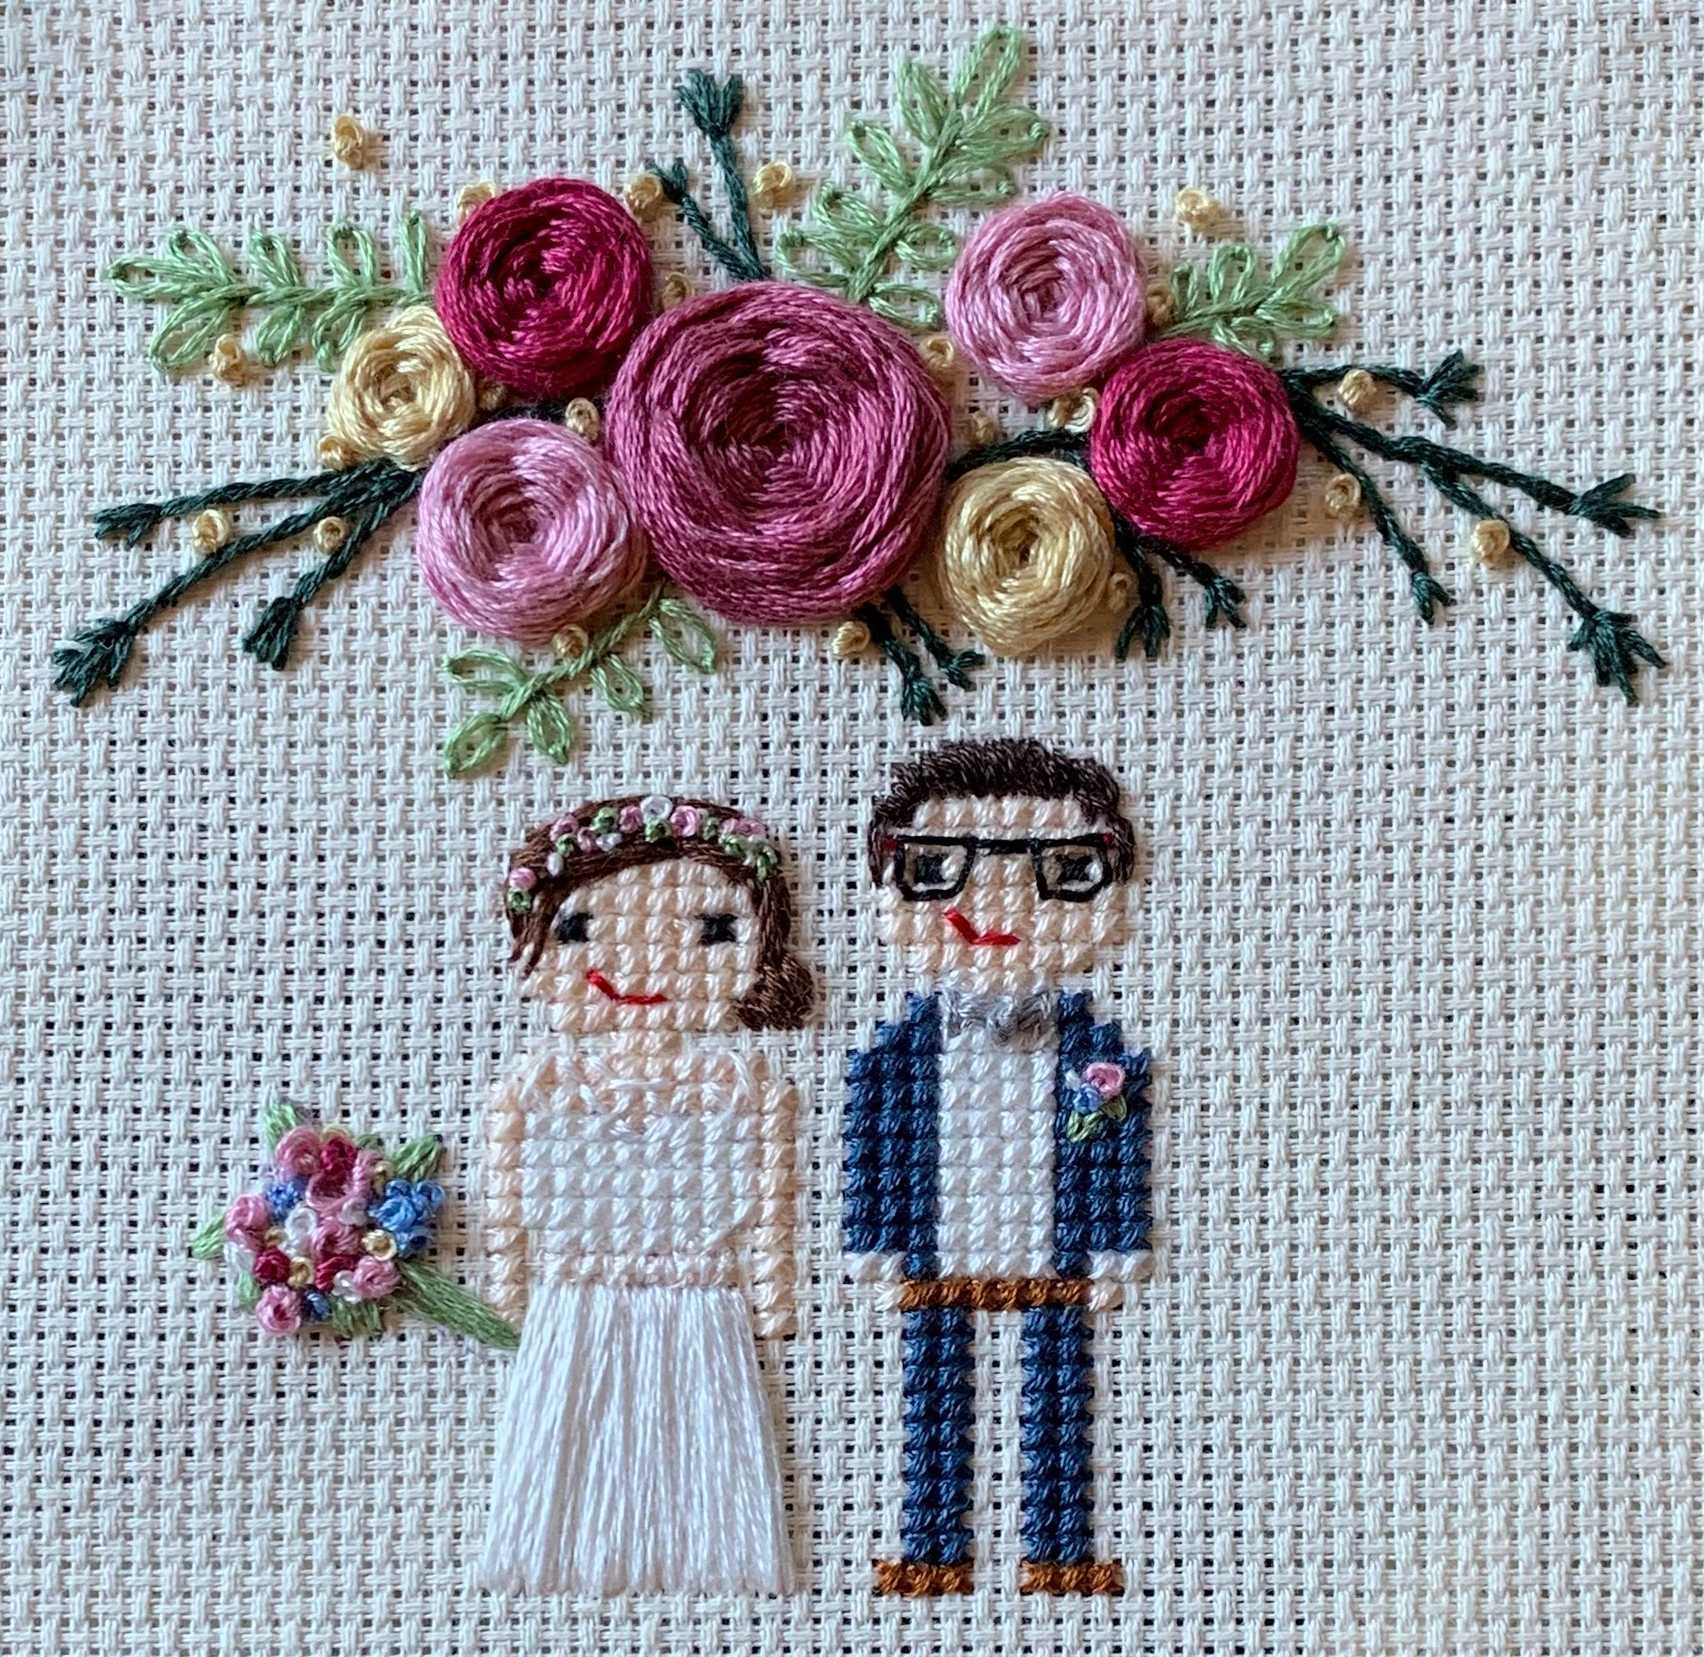 Marisa and Florian in their wedding outfits as embroidery artwork